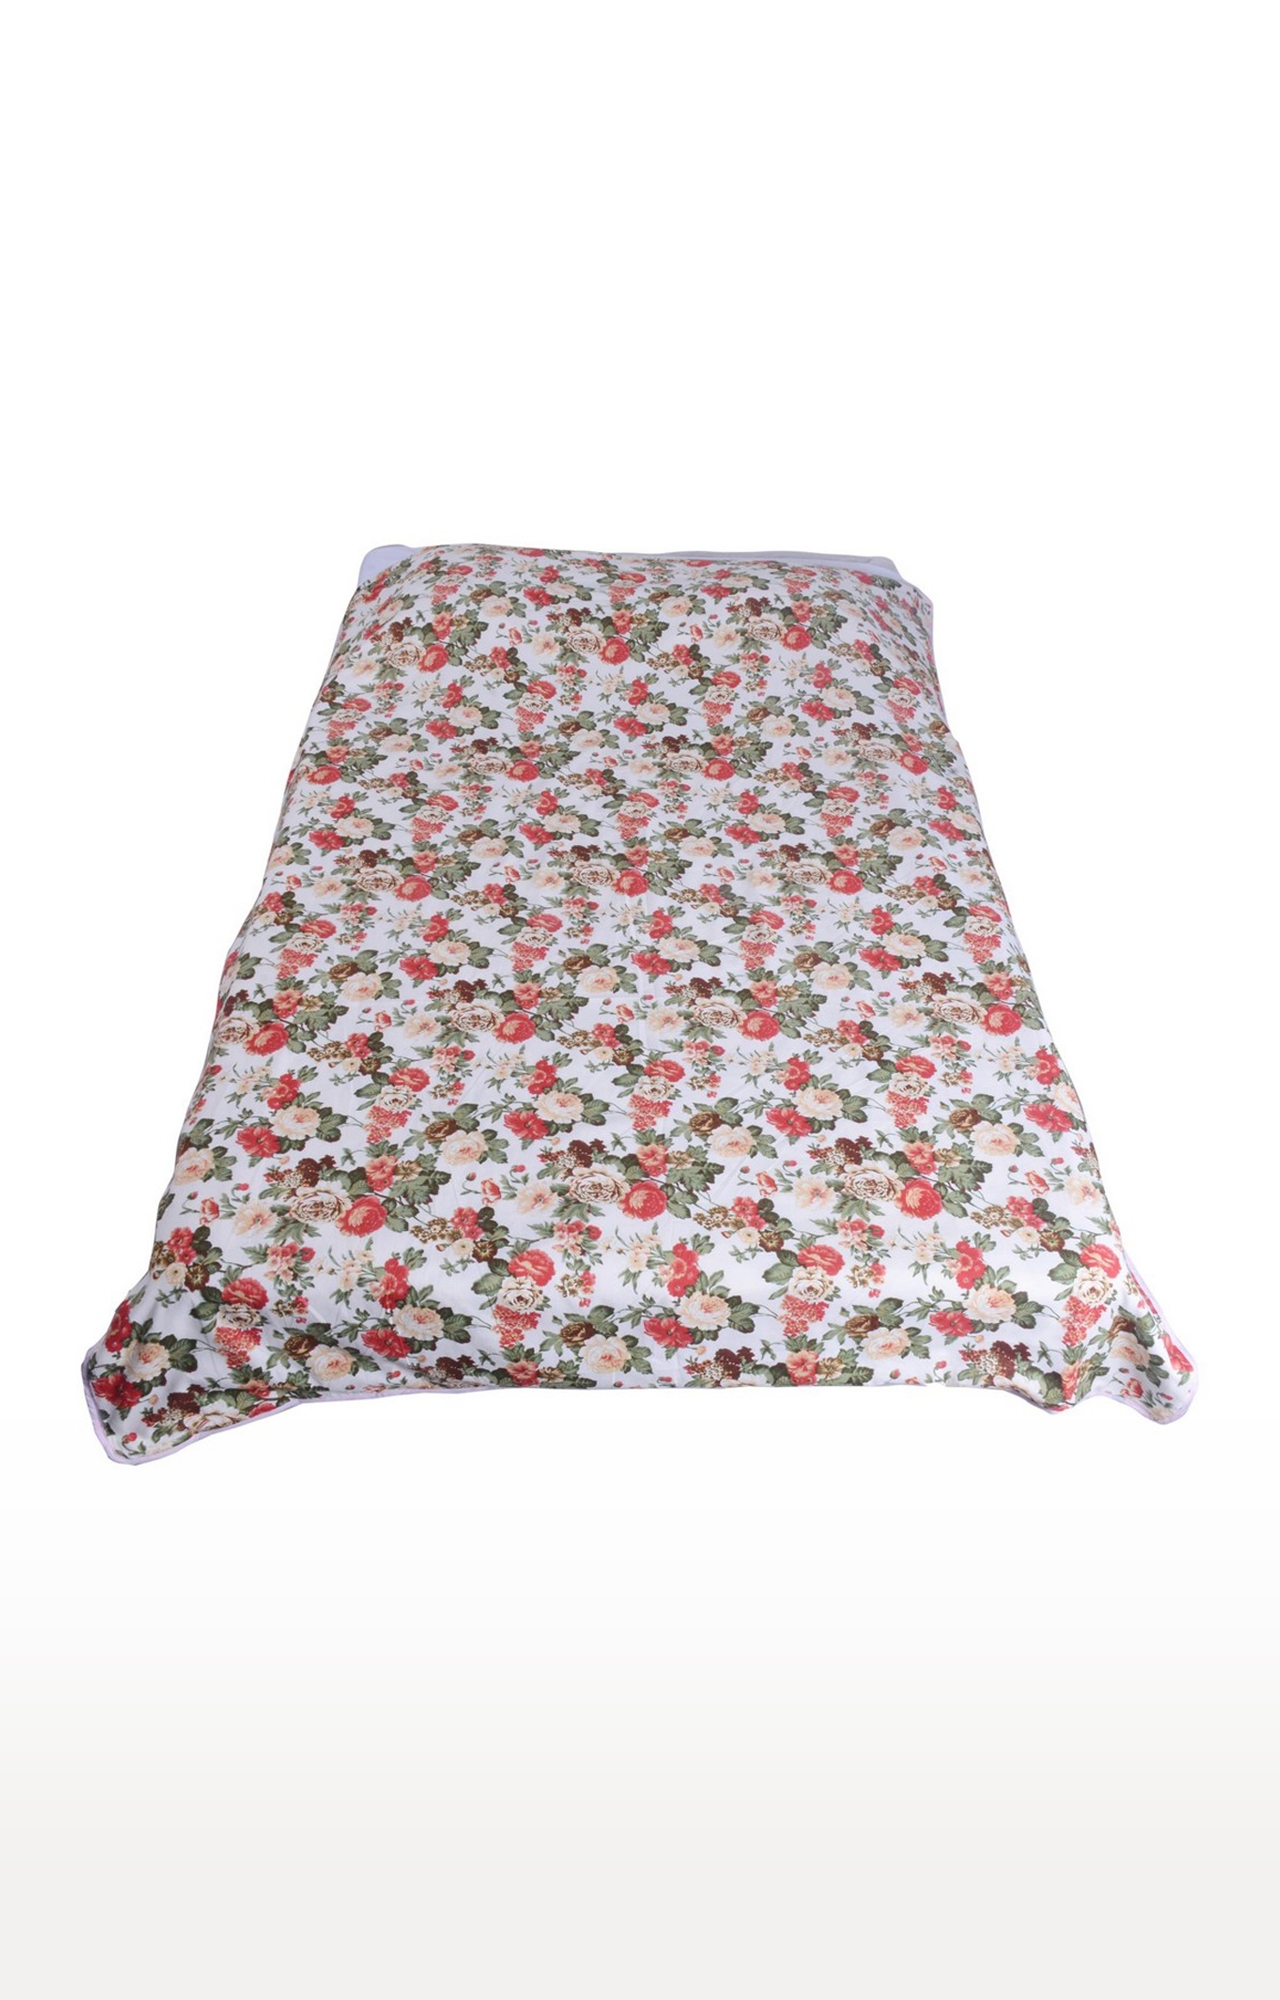 Red Garland Flower Printed Cotton 3 Layer Single Bed Quilt Dohar